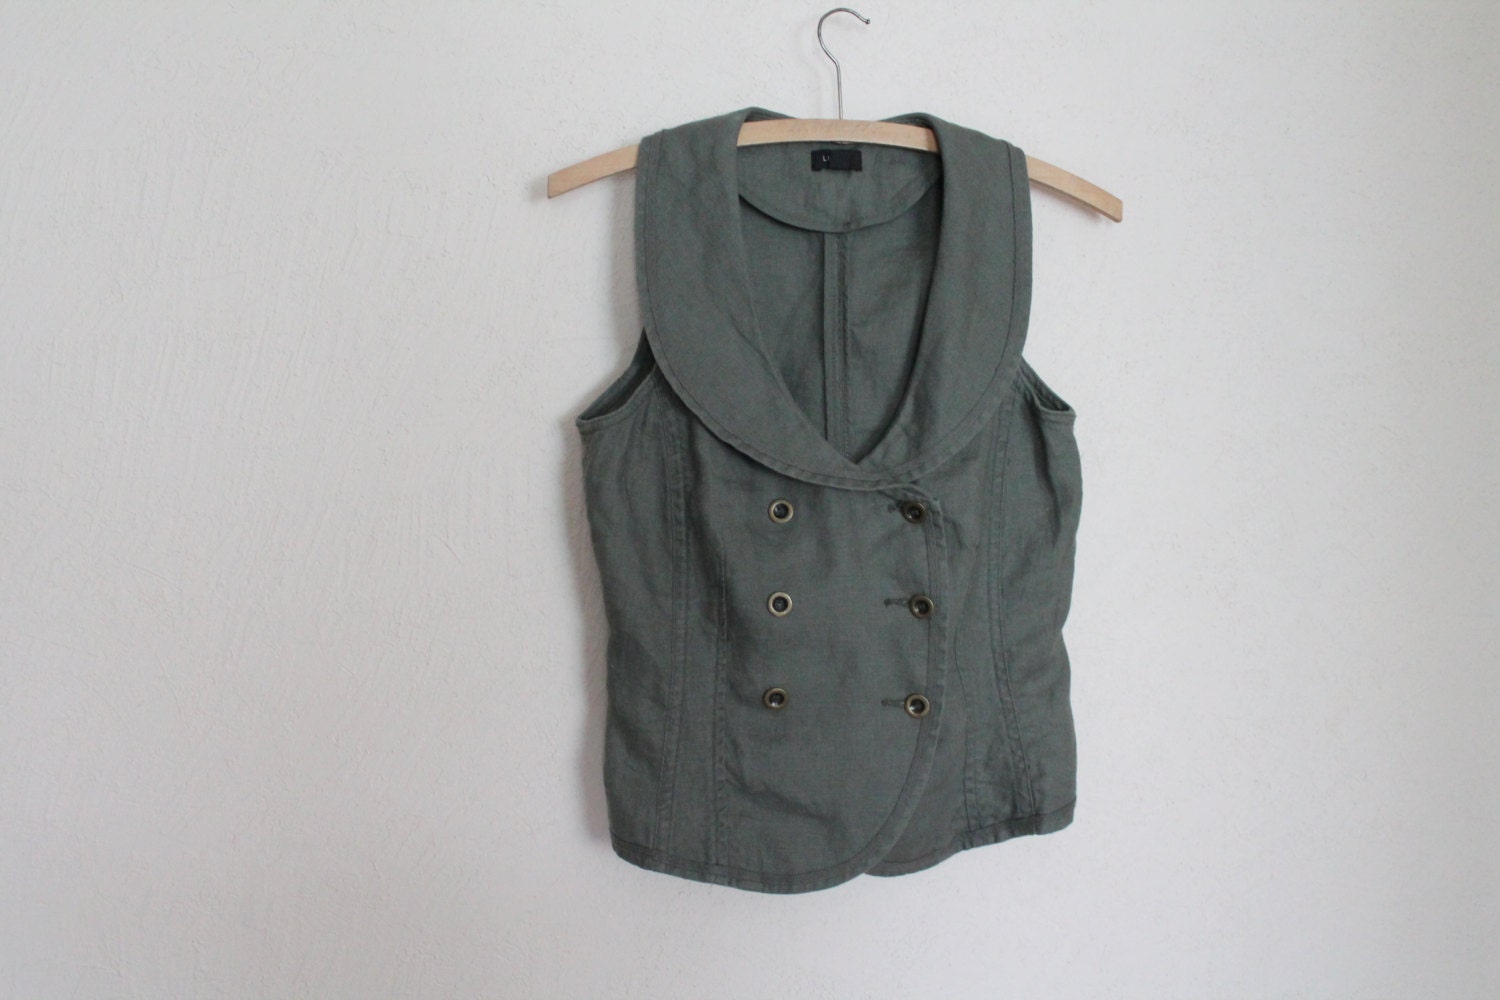 Olive Green Khaki Linen Vest Women Waistcoat Suit Collar Sleeveless Jacket Fitted Traditional Formal Classic Romantic Small Size